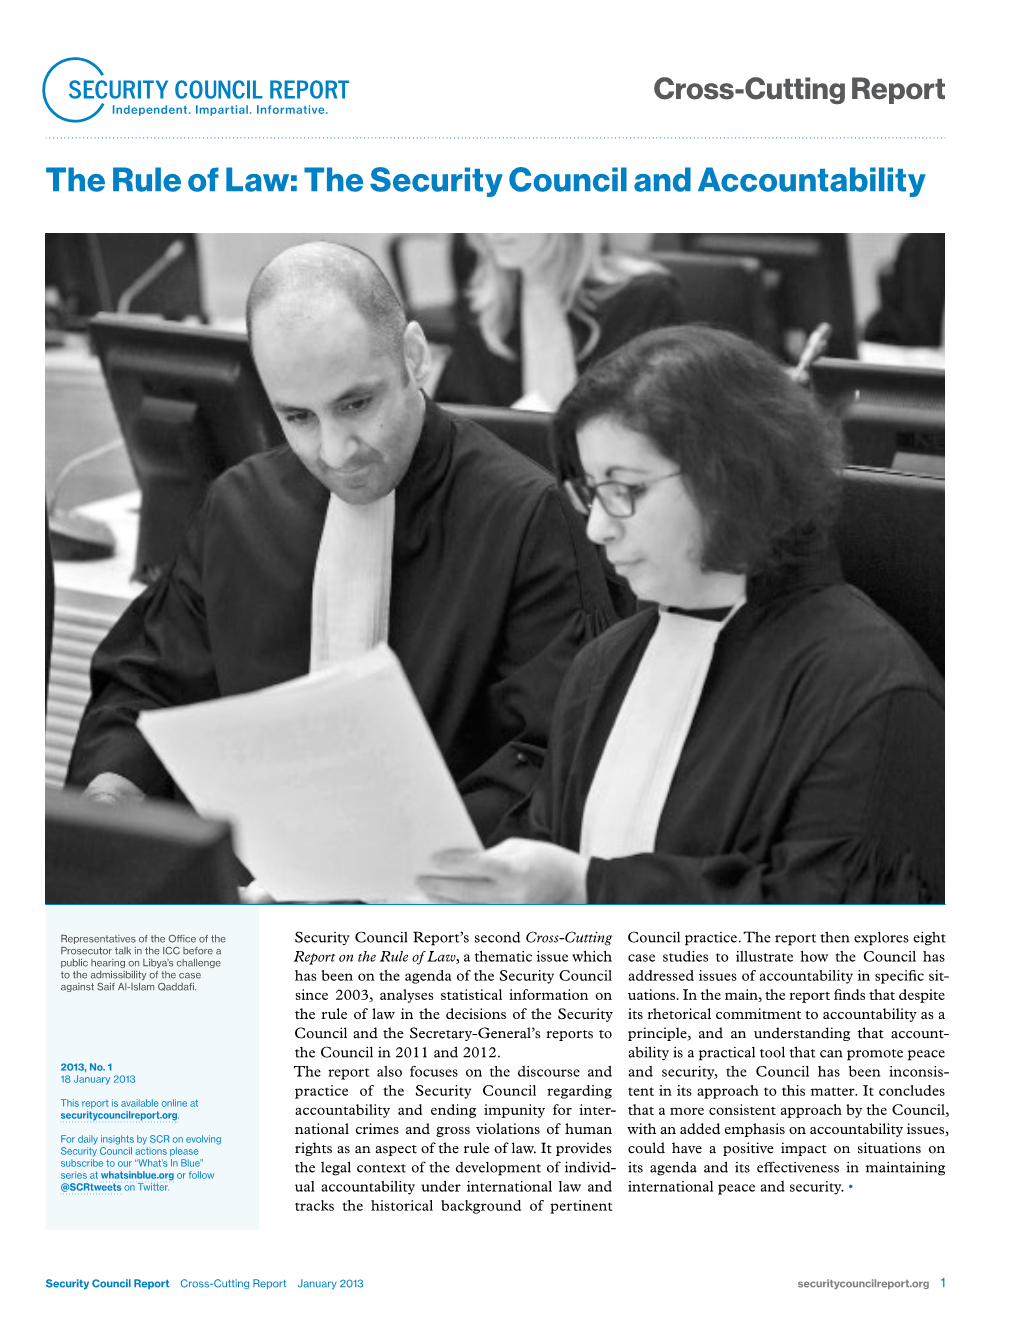 The Rule of Law: the Security Council and Accountability